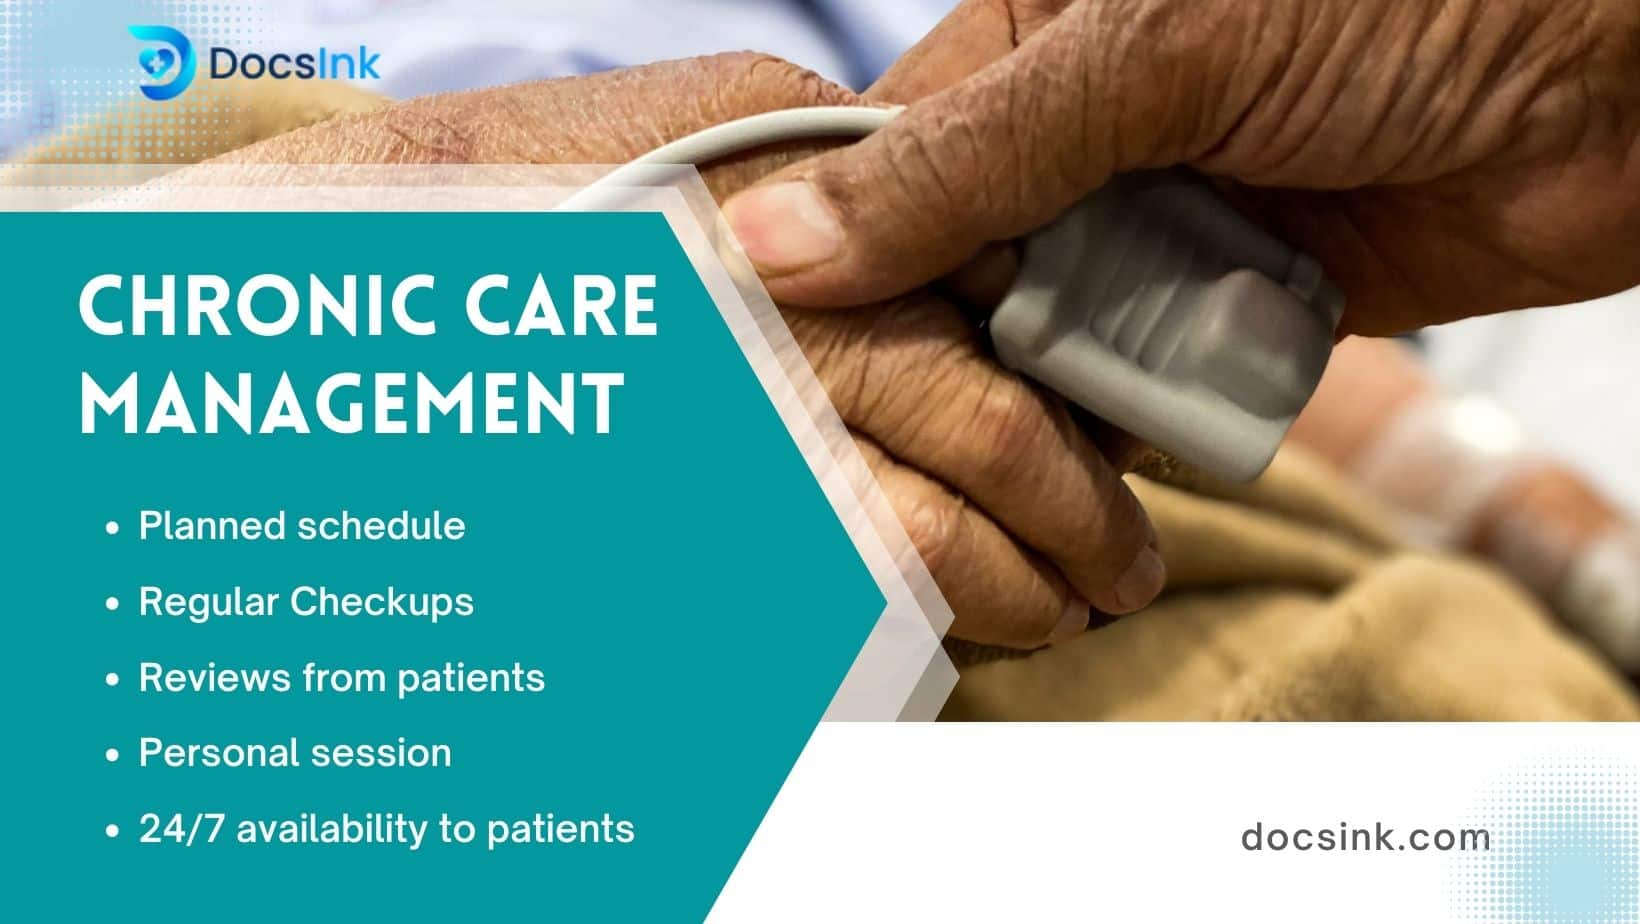 Chronic Care Management: Beneficiaries and Importance